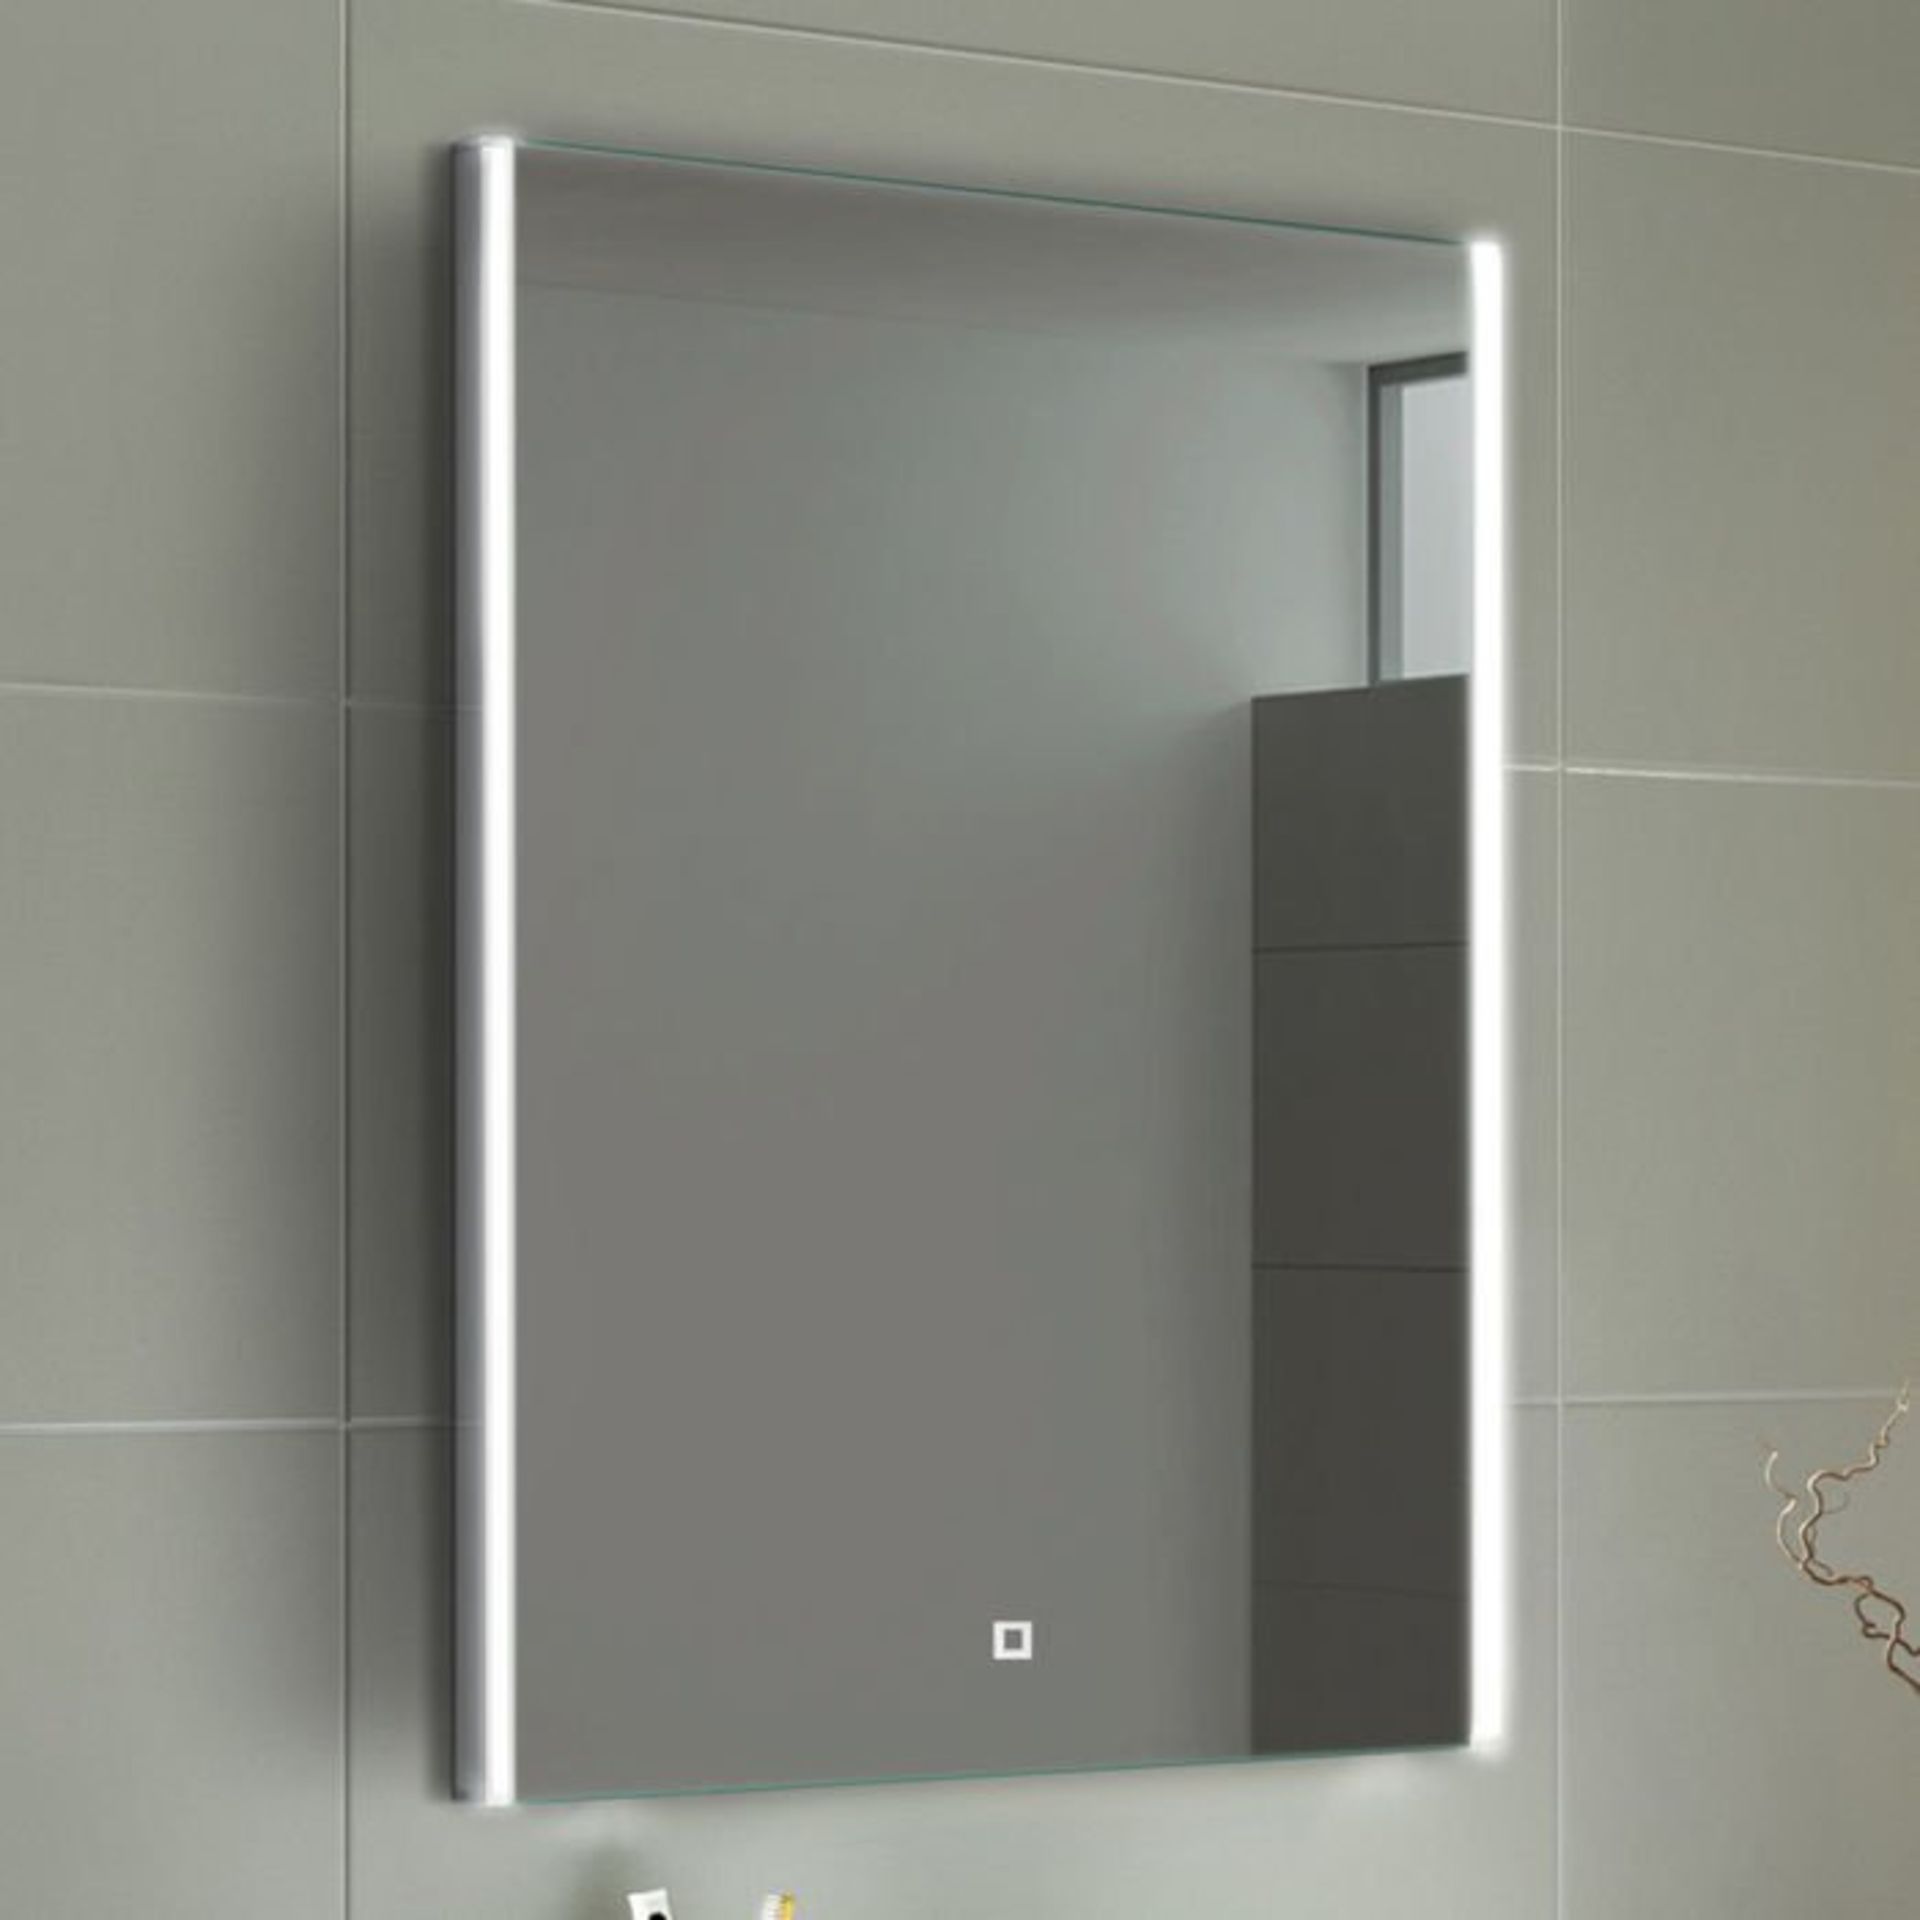 (H170) 700x500mm Lunar Illuminated LED Mirror - Switch Control. RRP £349.99. Energy efficient LED - Image 4 of 5